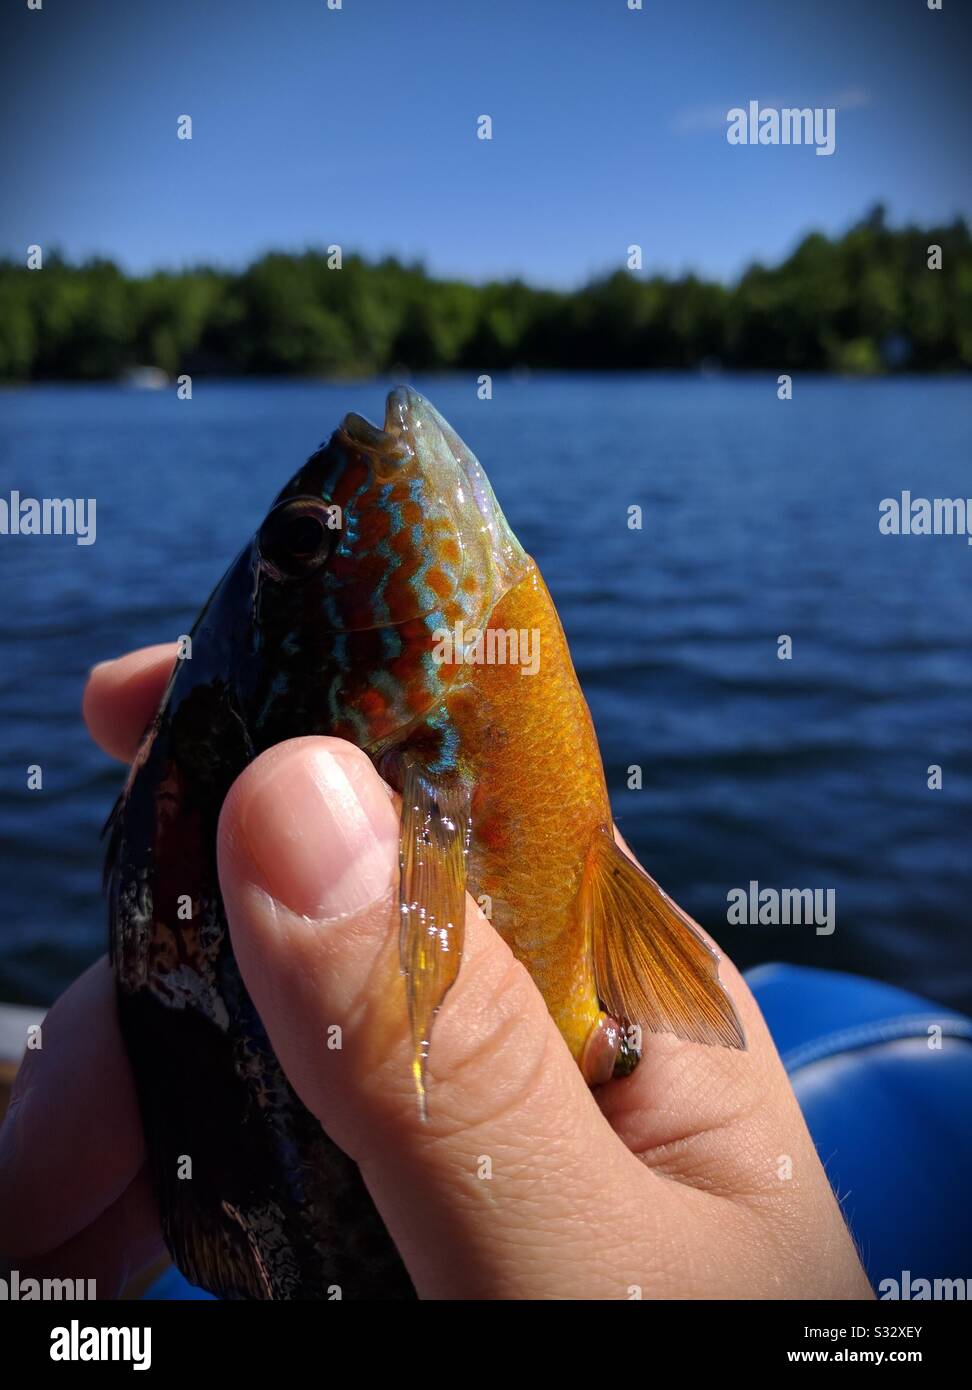 A caught fish being held in one hand Stock Photo